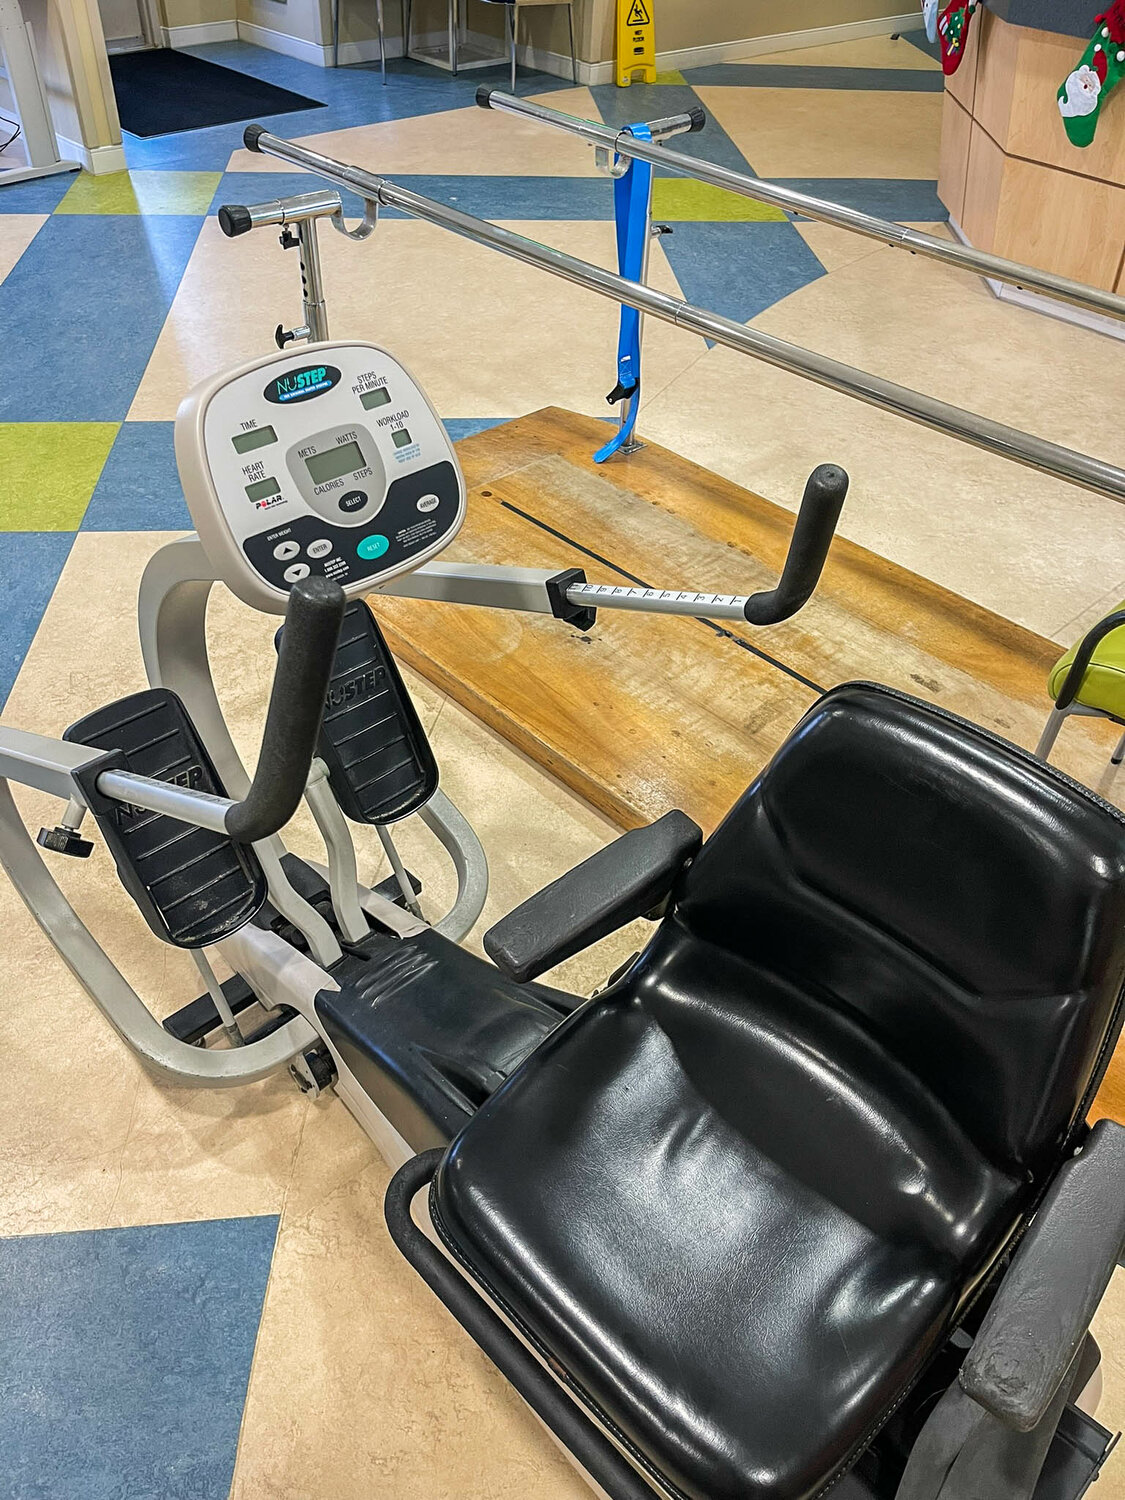 Rehab equipment available for Fauquier Health patients.